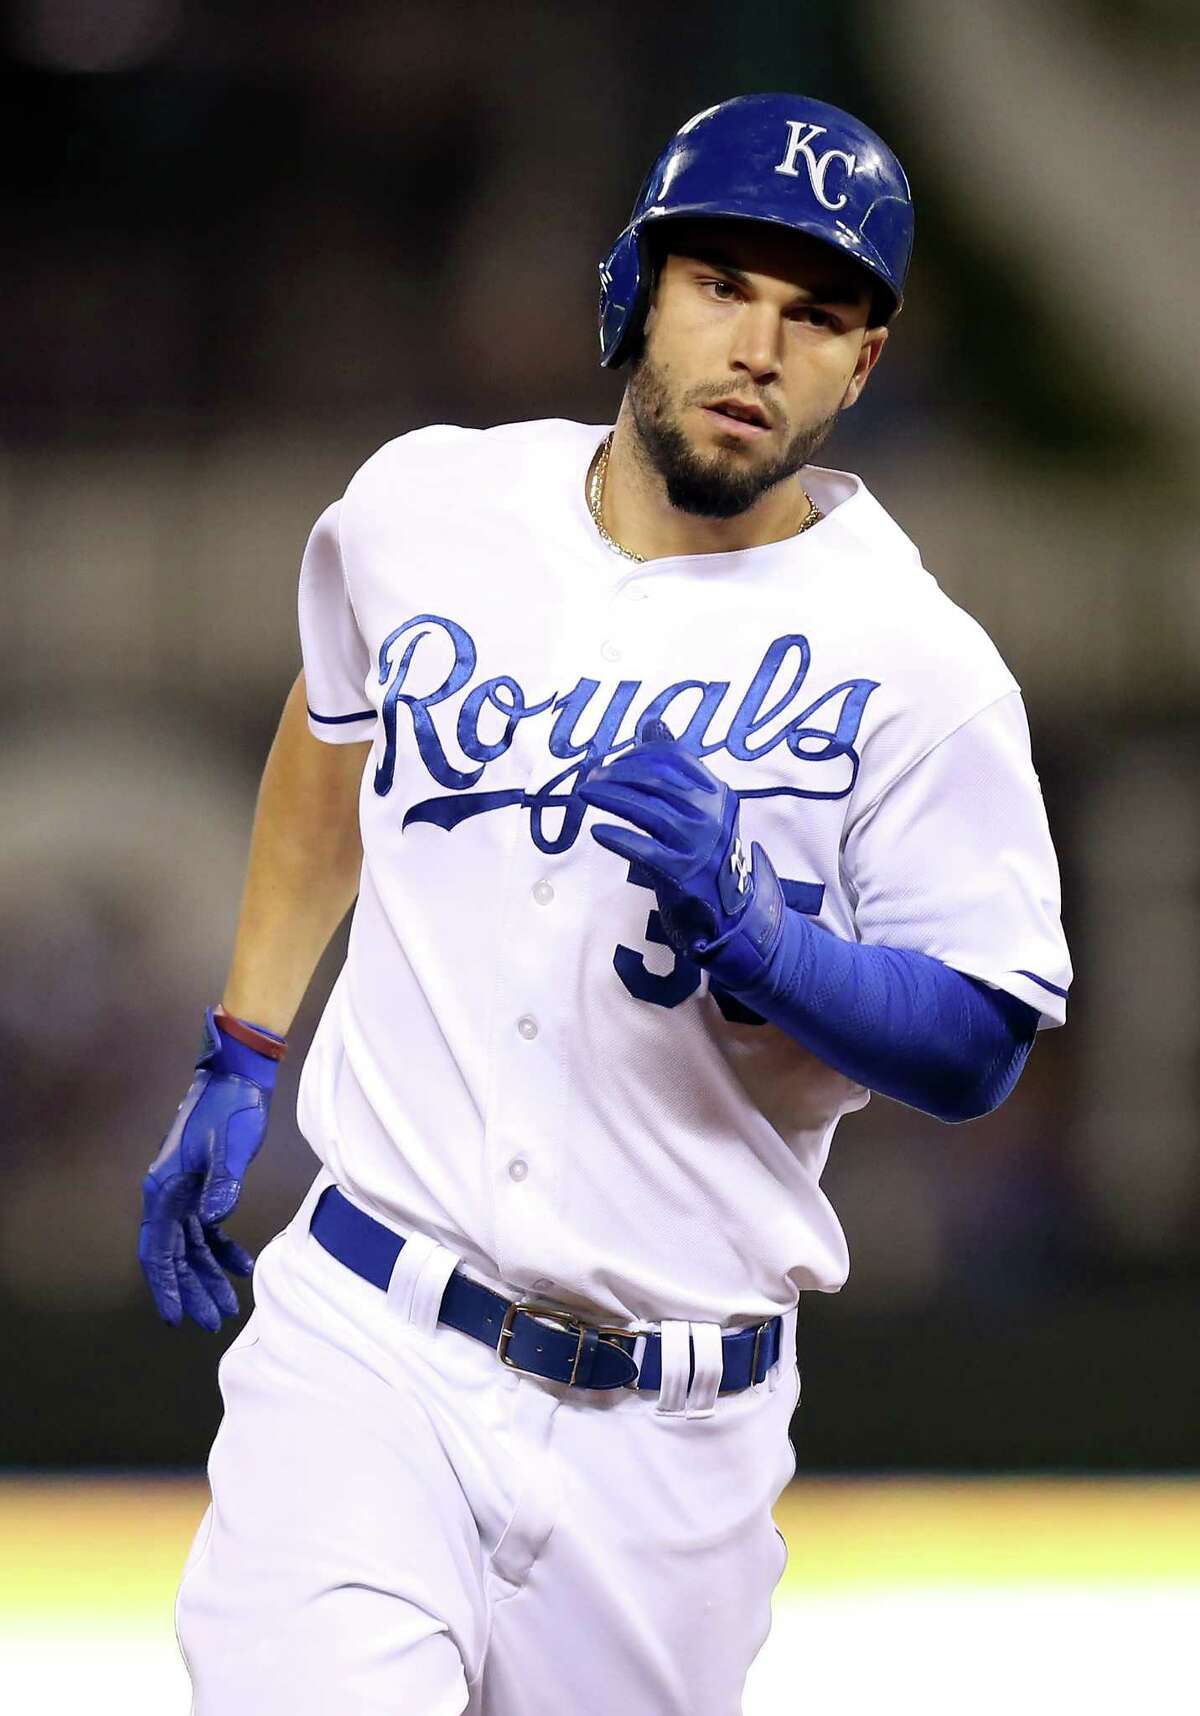 Royals' Moustakas, Hosmer living up to potential in playoffs